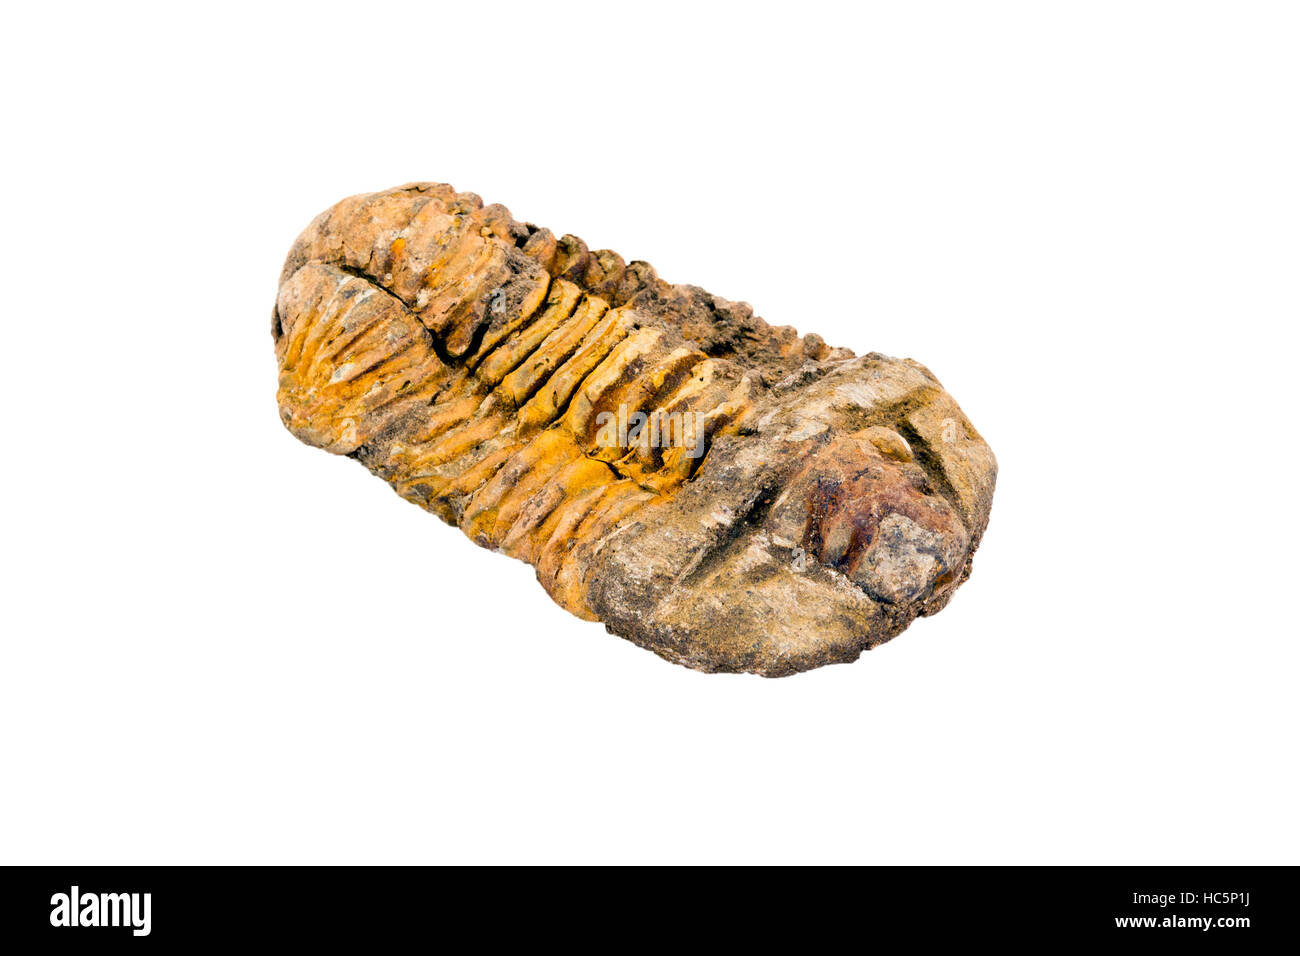 Trilobite fossil (Calymene sp.) from Morocco Stock Photo